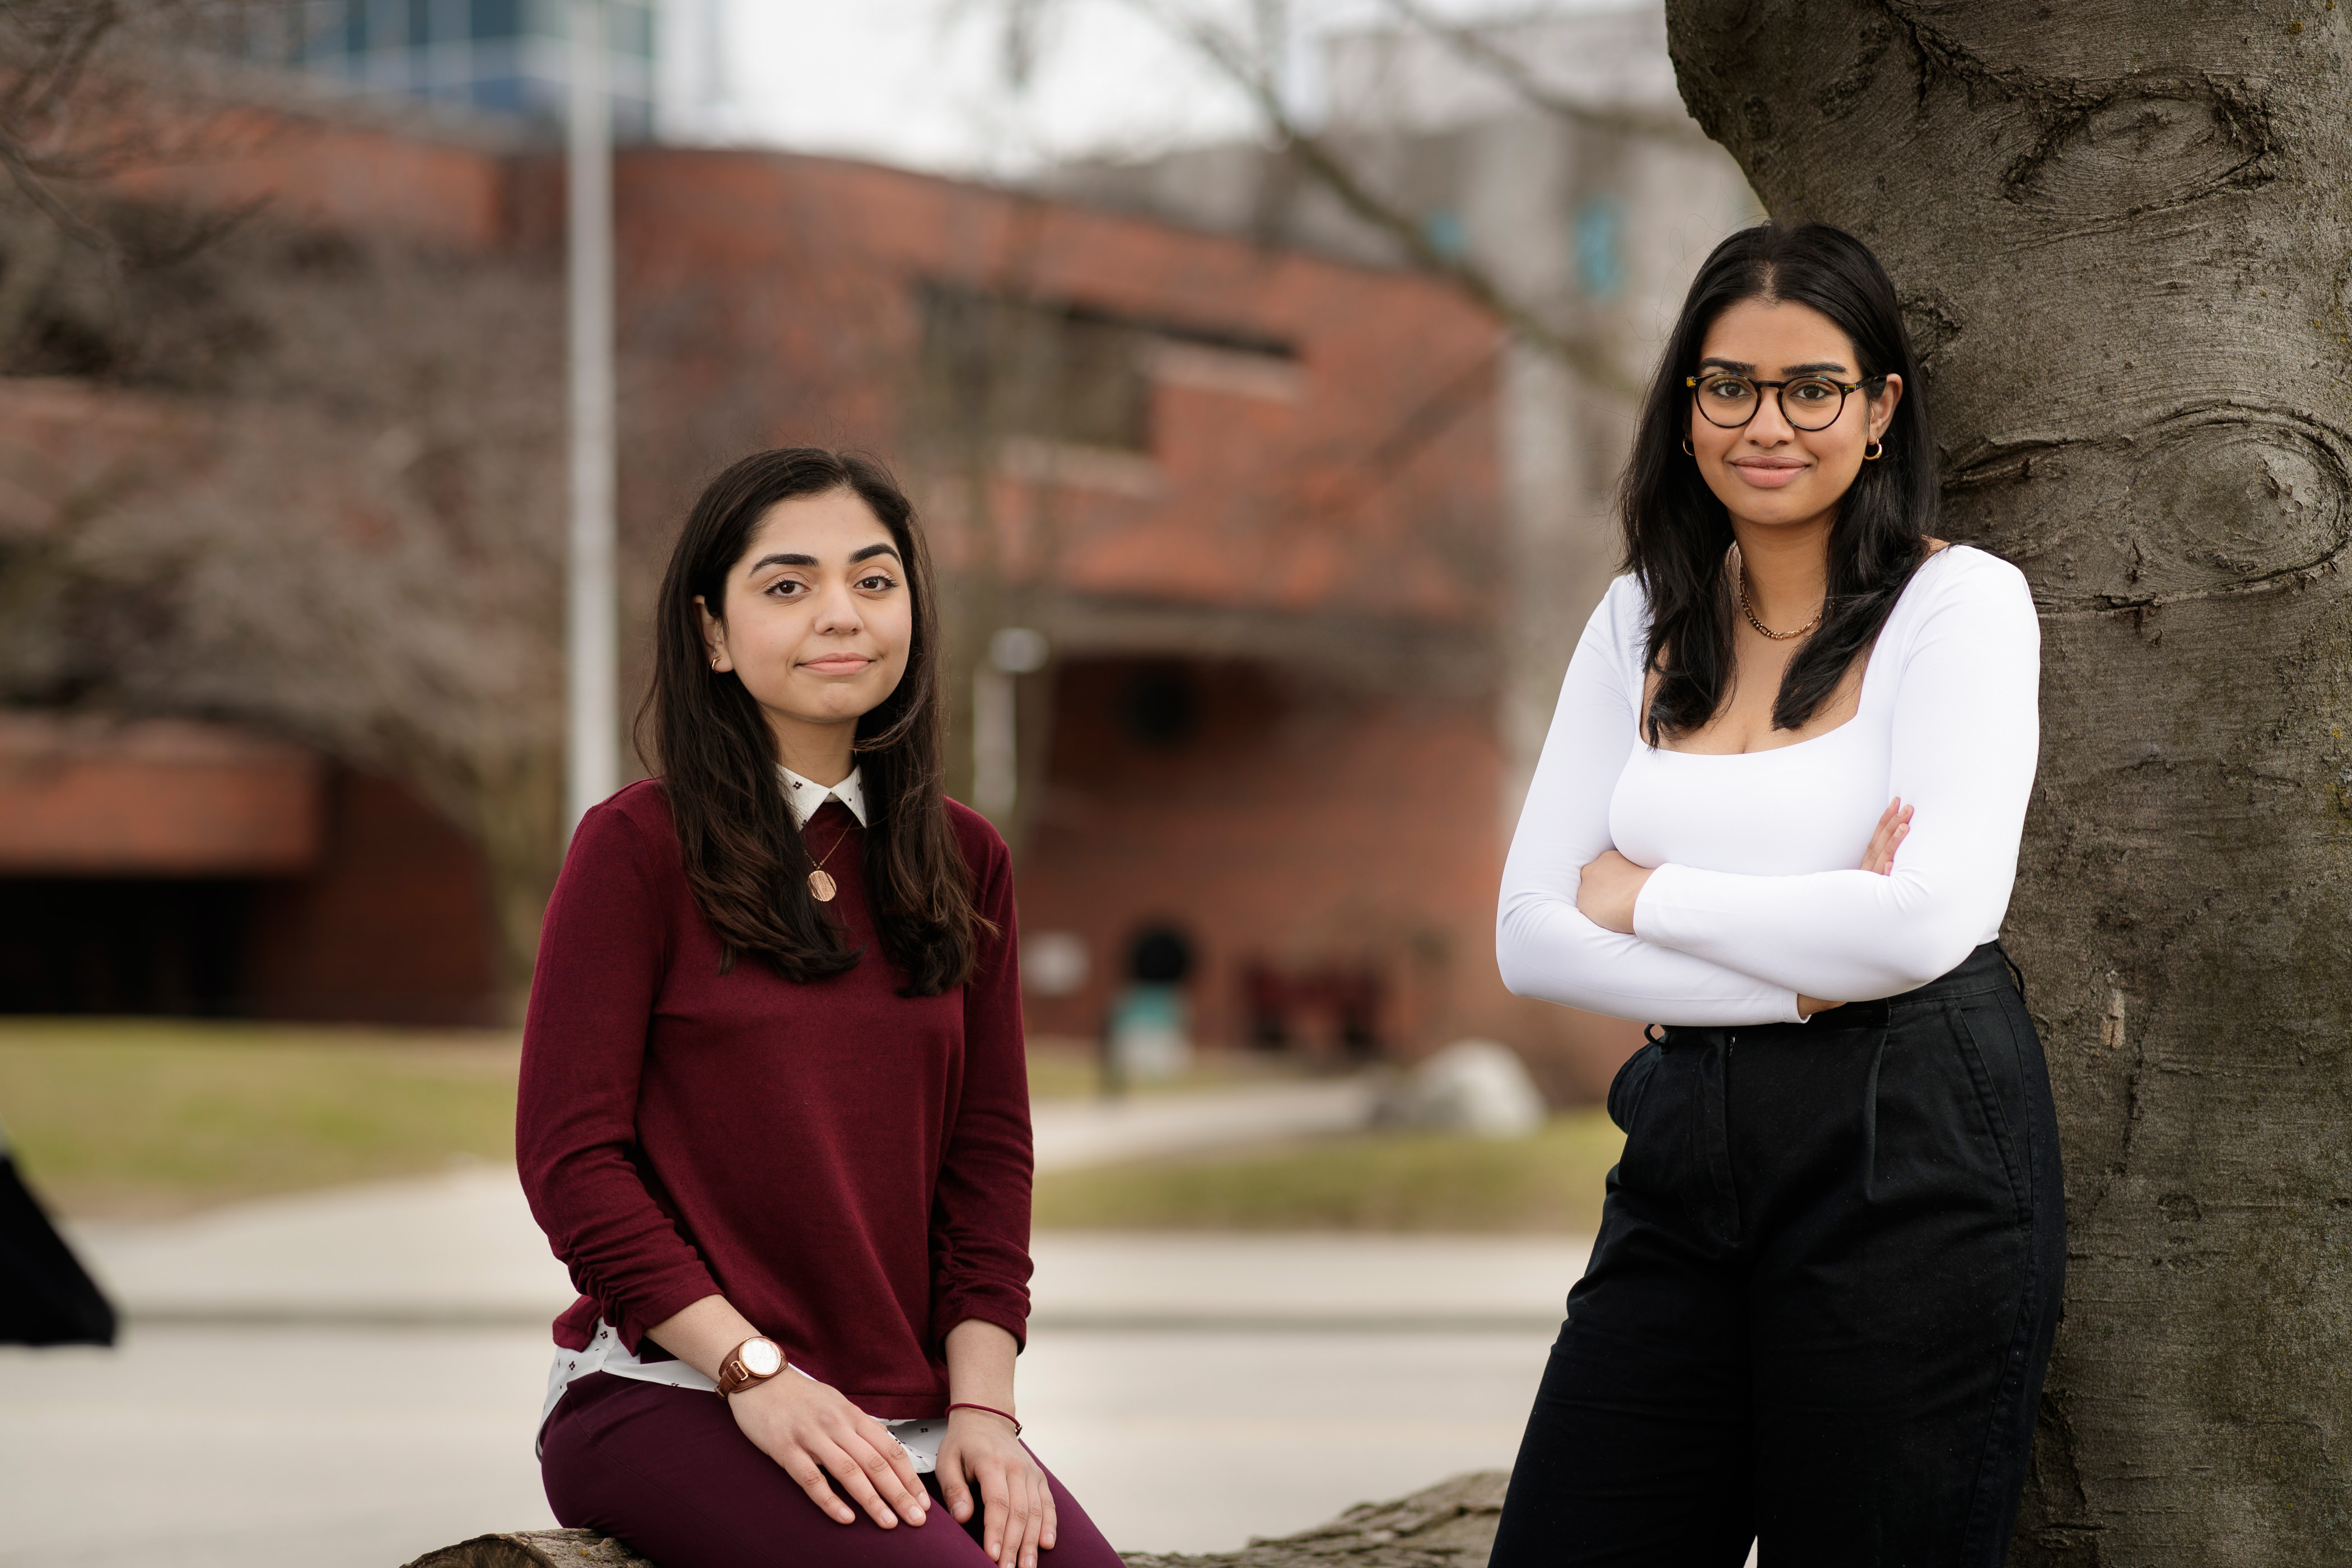 Noor and Lavanya, 2021-22 library ambassadors outside of Thode library can be seen.